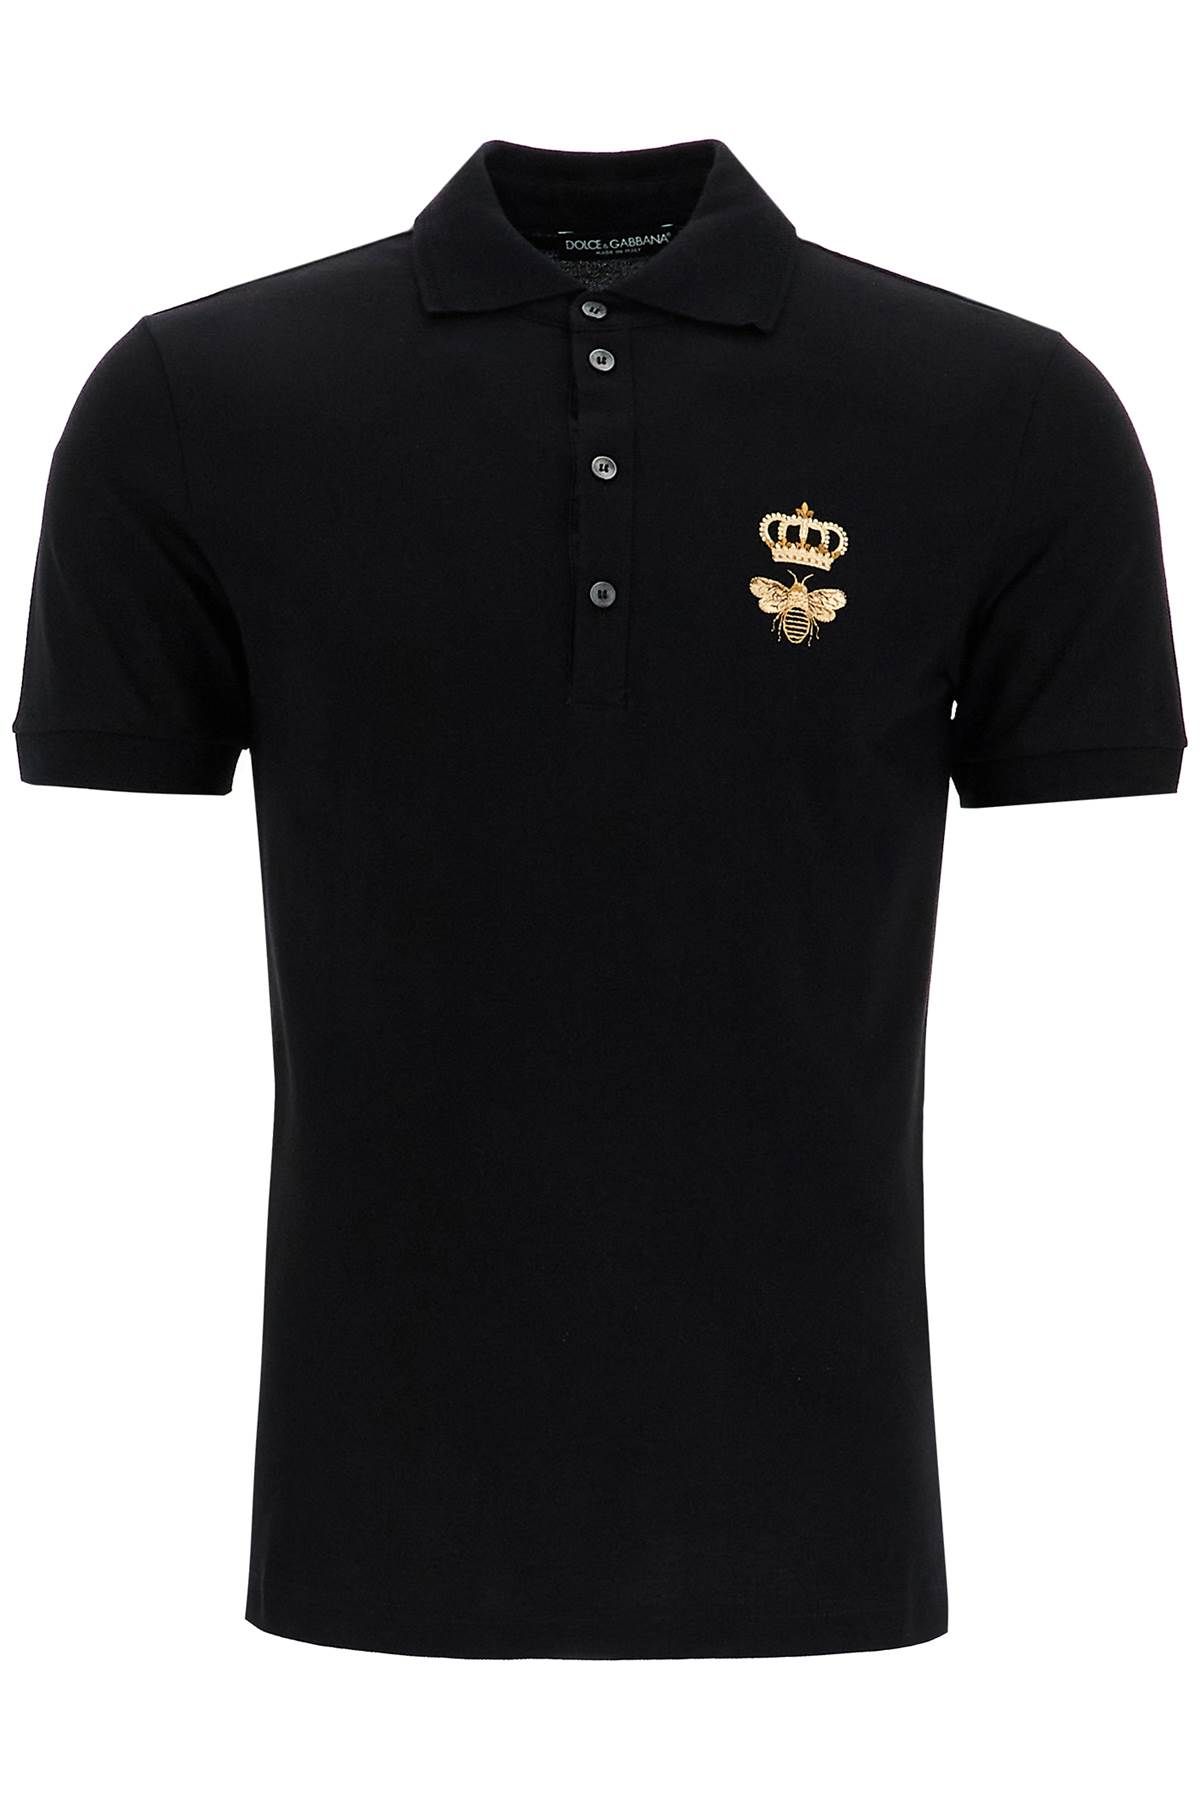 Dolce & Gabbana DOLCE & GABBANA slim fit polo shirt with embroidery